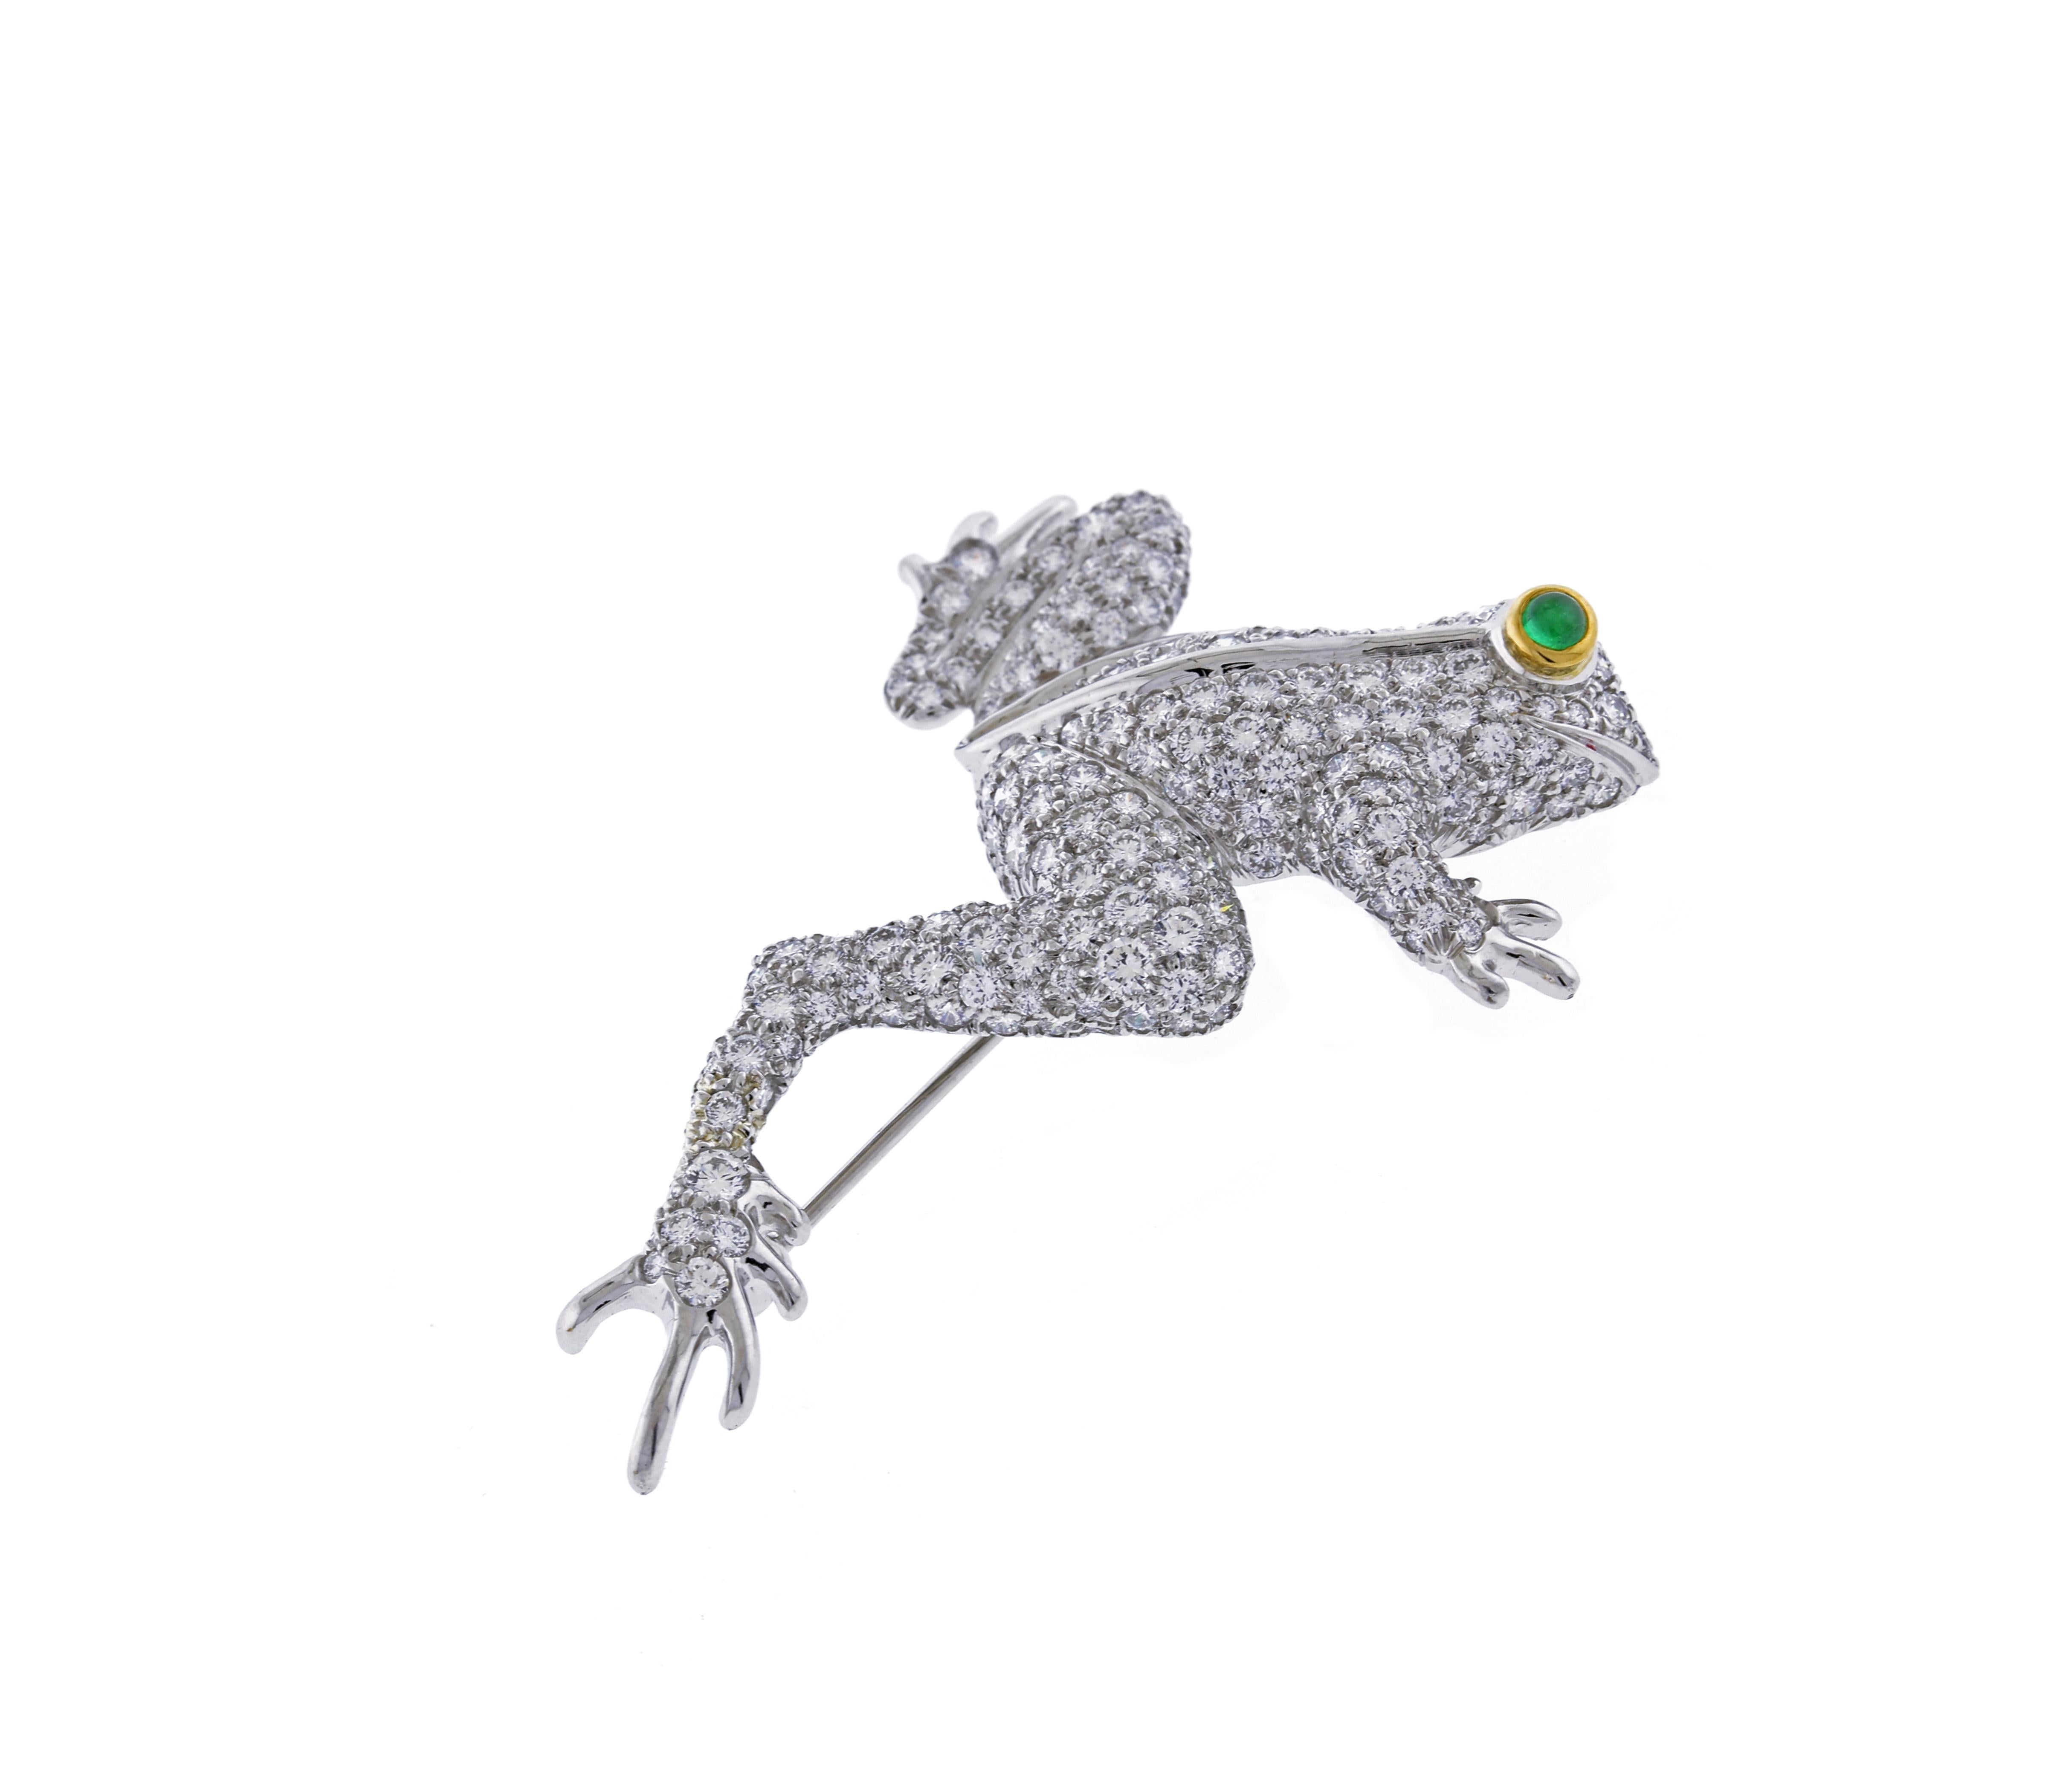 From Tiffany & Co, this brooch is made of platinum with a yellow gold bezel set cabochon emerald eye.
♦ Designer: Tiffany & Co.
♦ Metal: Platinum & 18 karat yellow gold
♦ Gemstone: Diamonds,  Emeralds
♦ Diamond Weight: 3.19ct
♦ Packaging: Tiffany